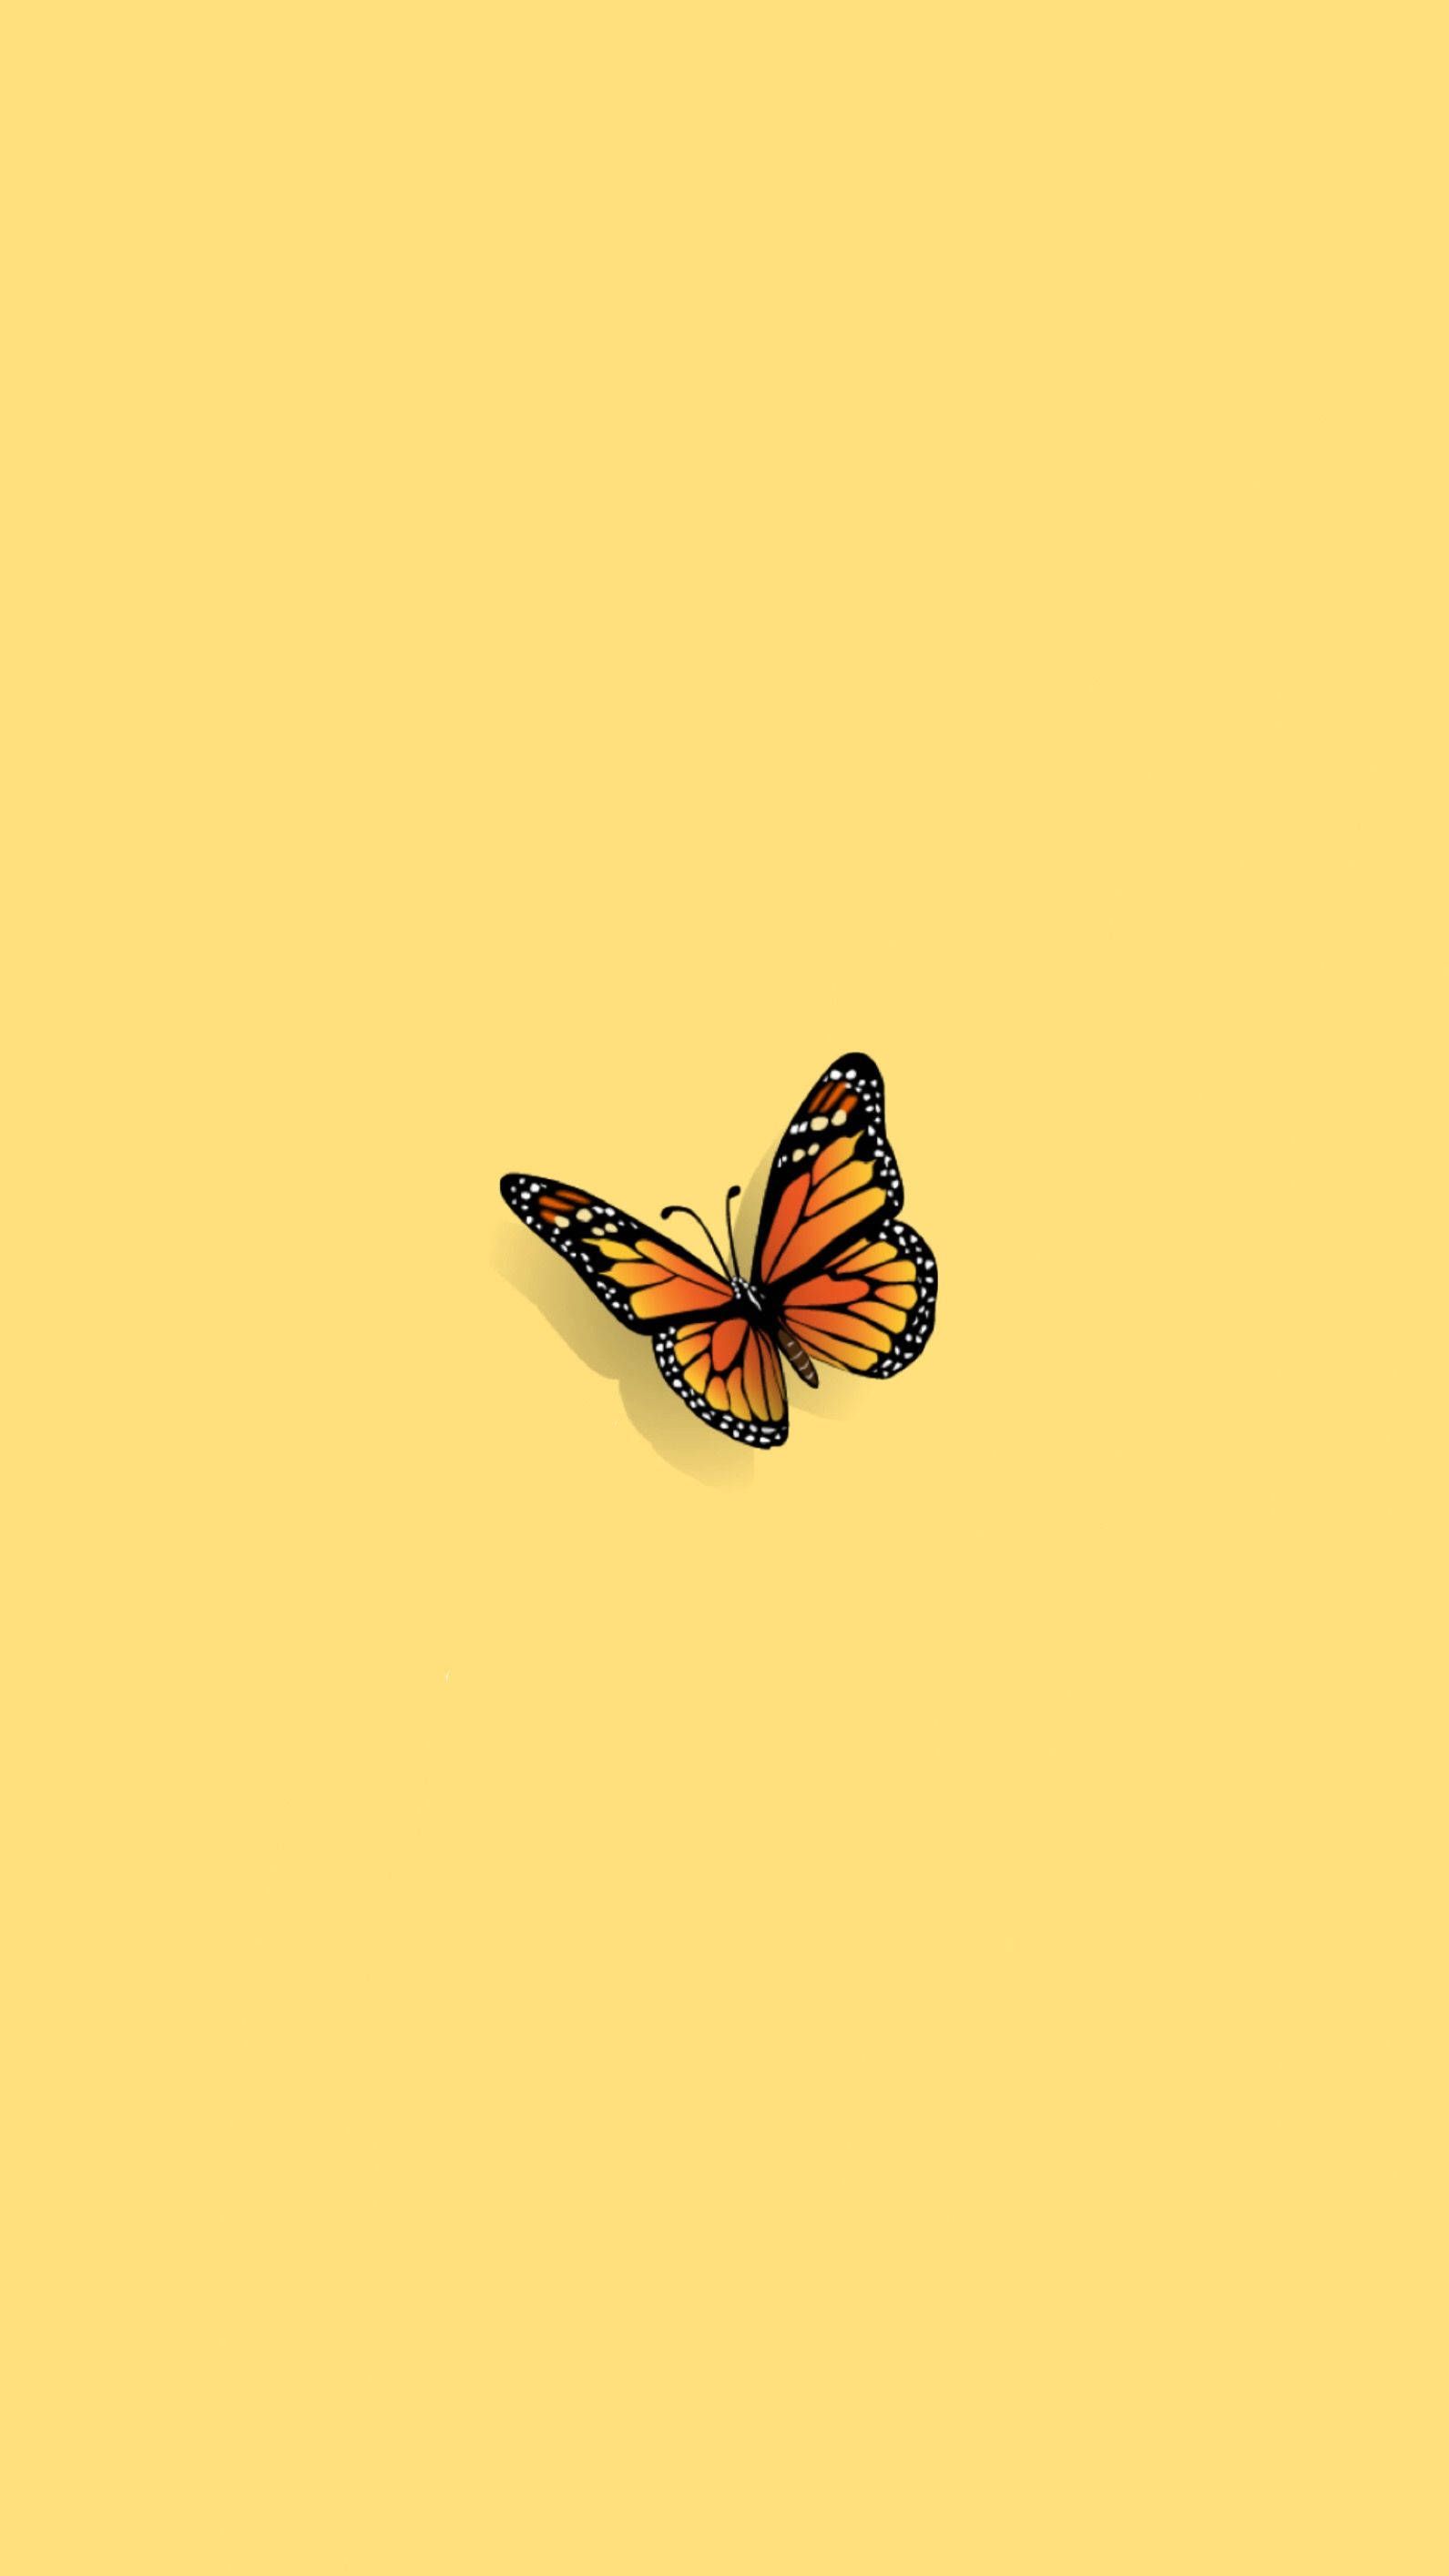 A butterfly on yellow background - Orange